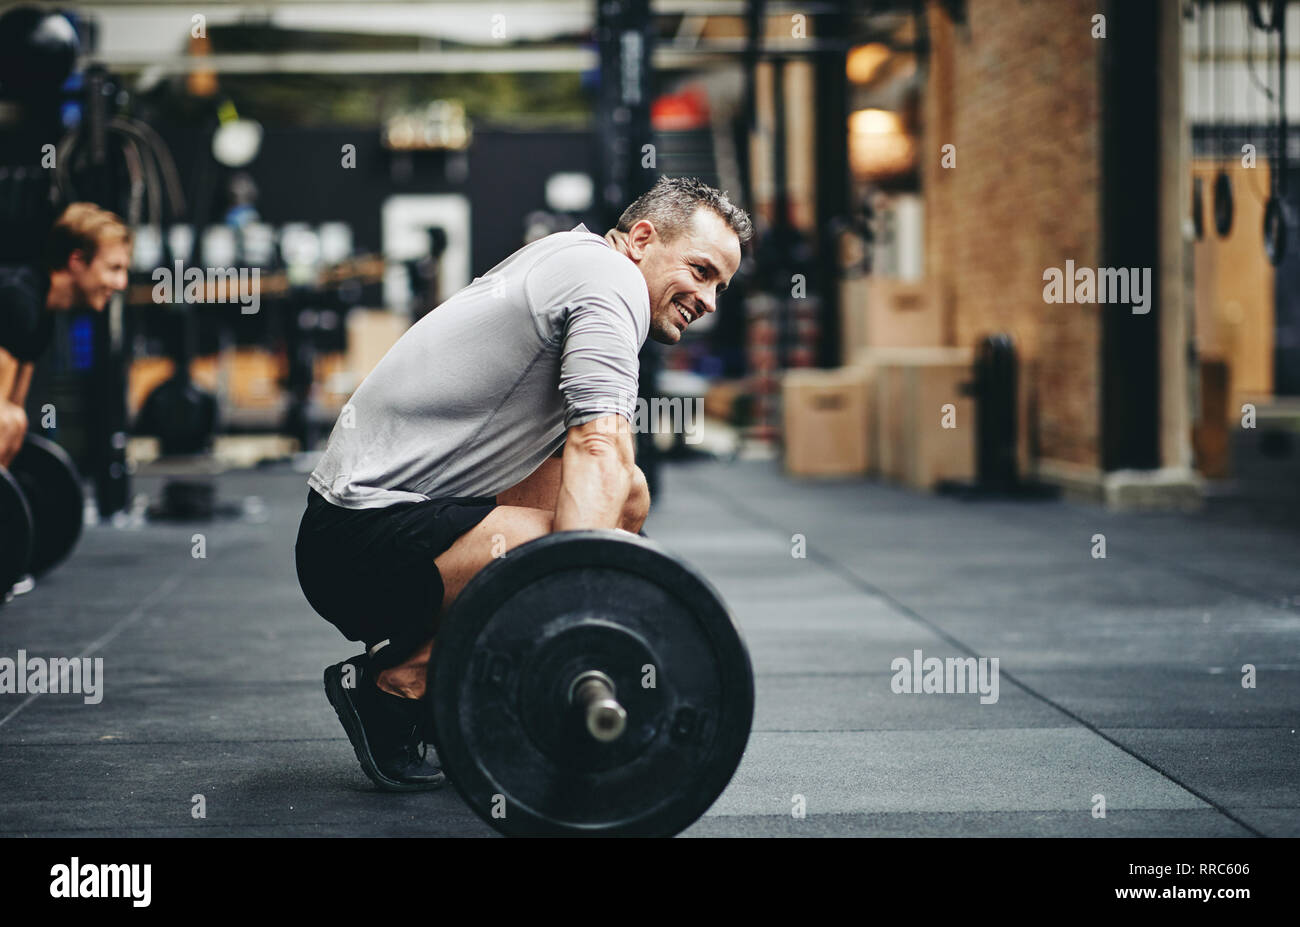 Fit man in sportswear smiling while preparing to lift heavy weights during a workout session at the gym Stock Photo